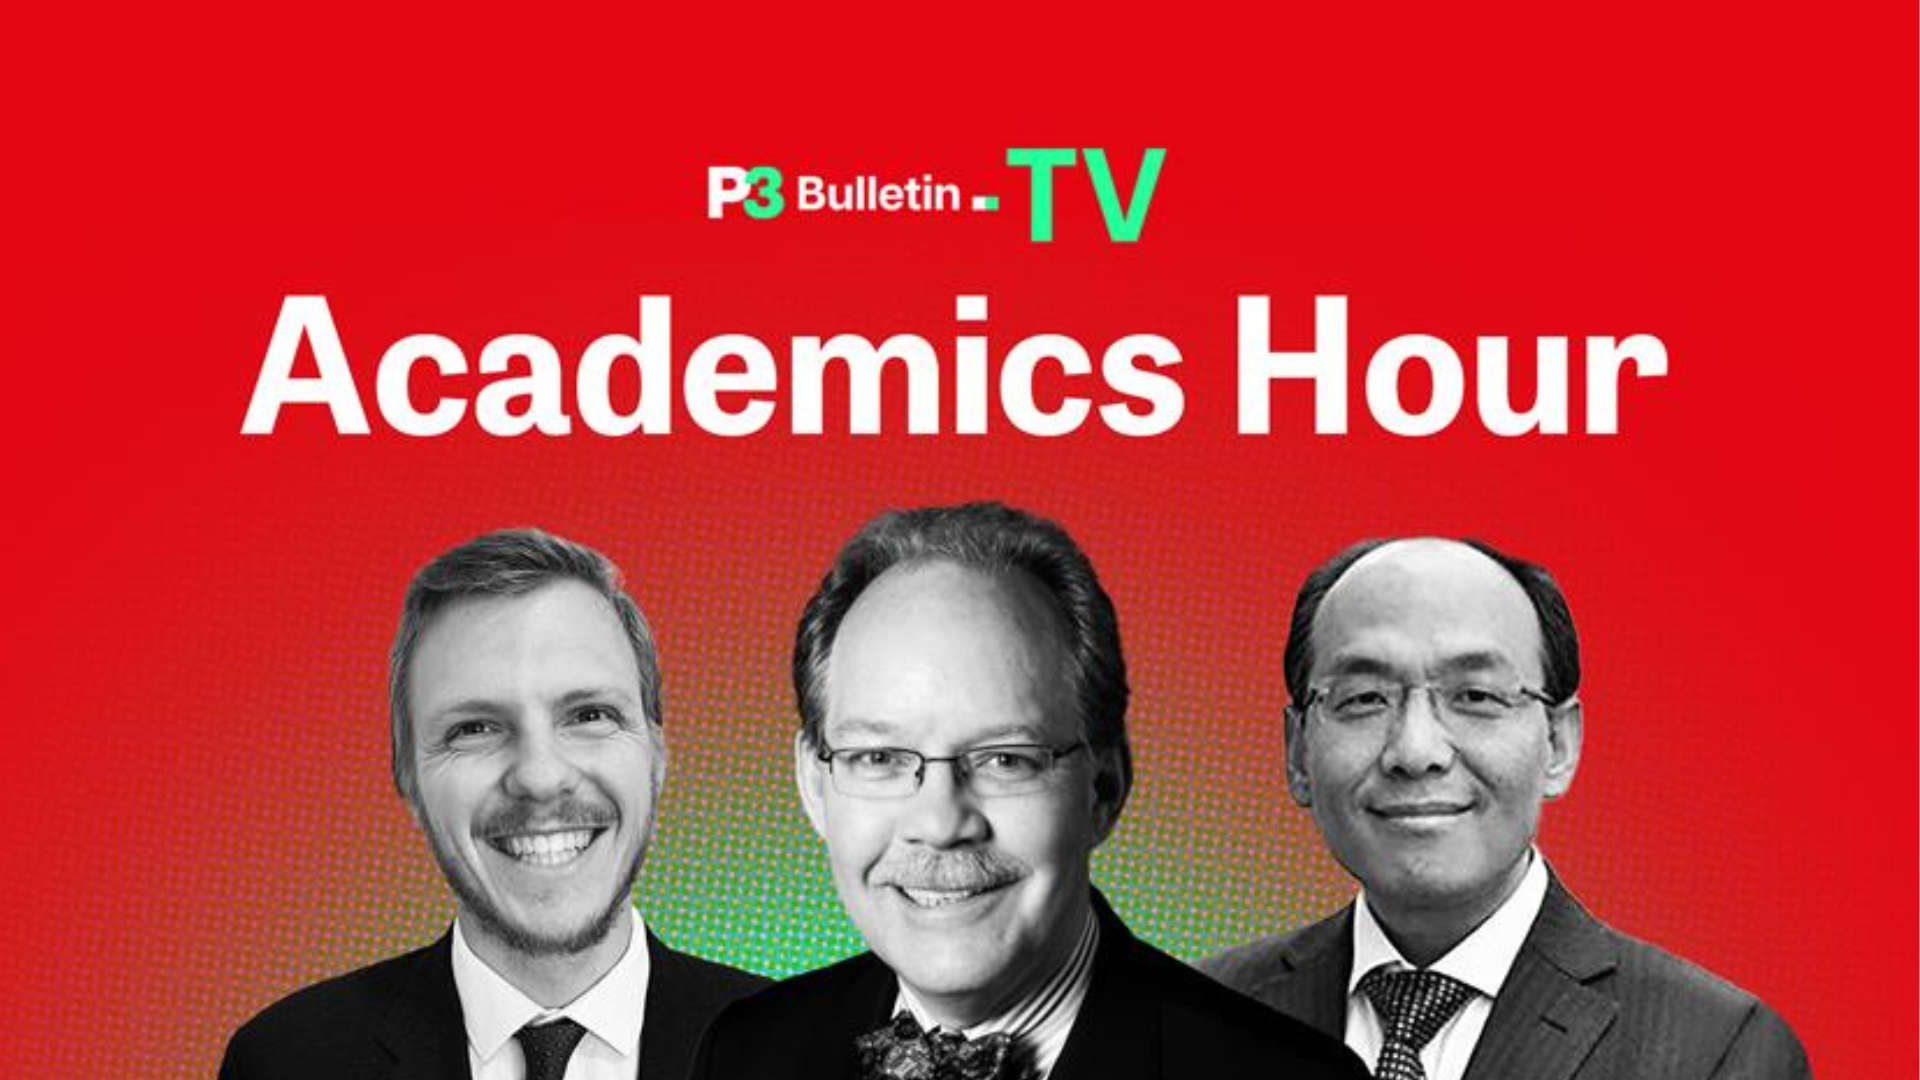 New Episode of P3TV: Academics Hour Podcast Featuring BAC Director